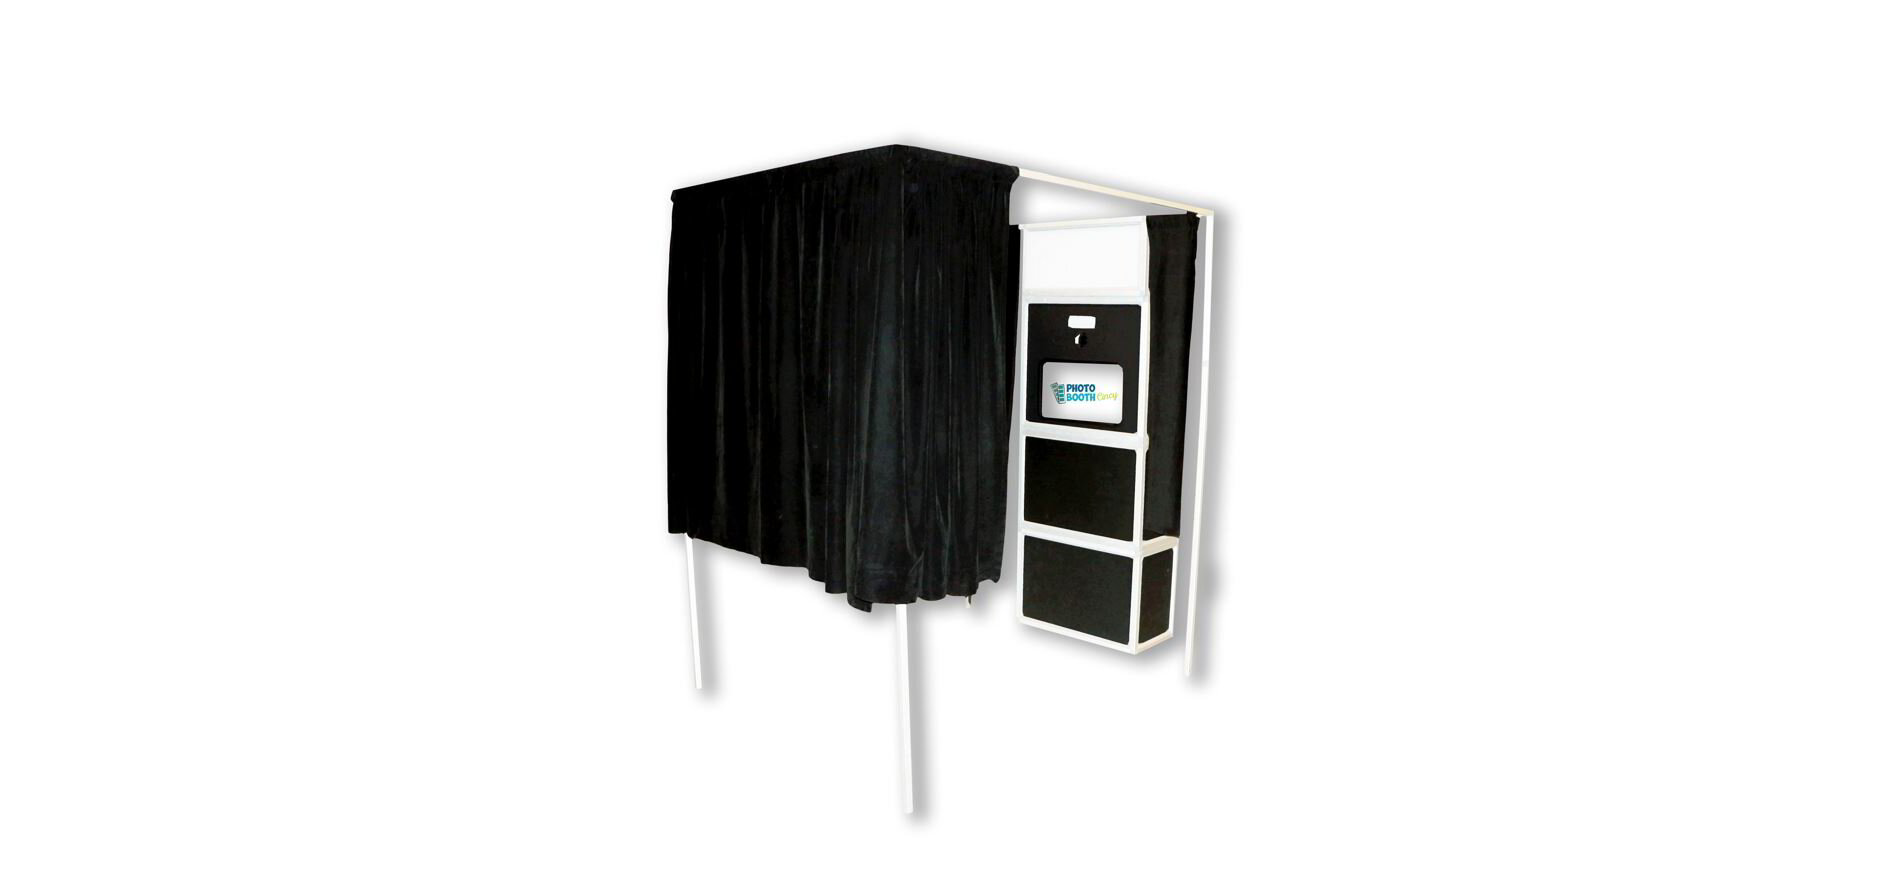 enclosed photo booth rental